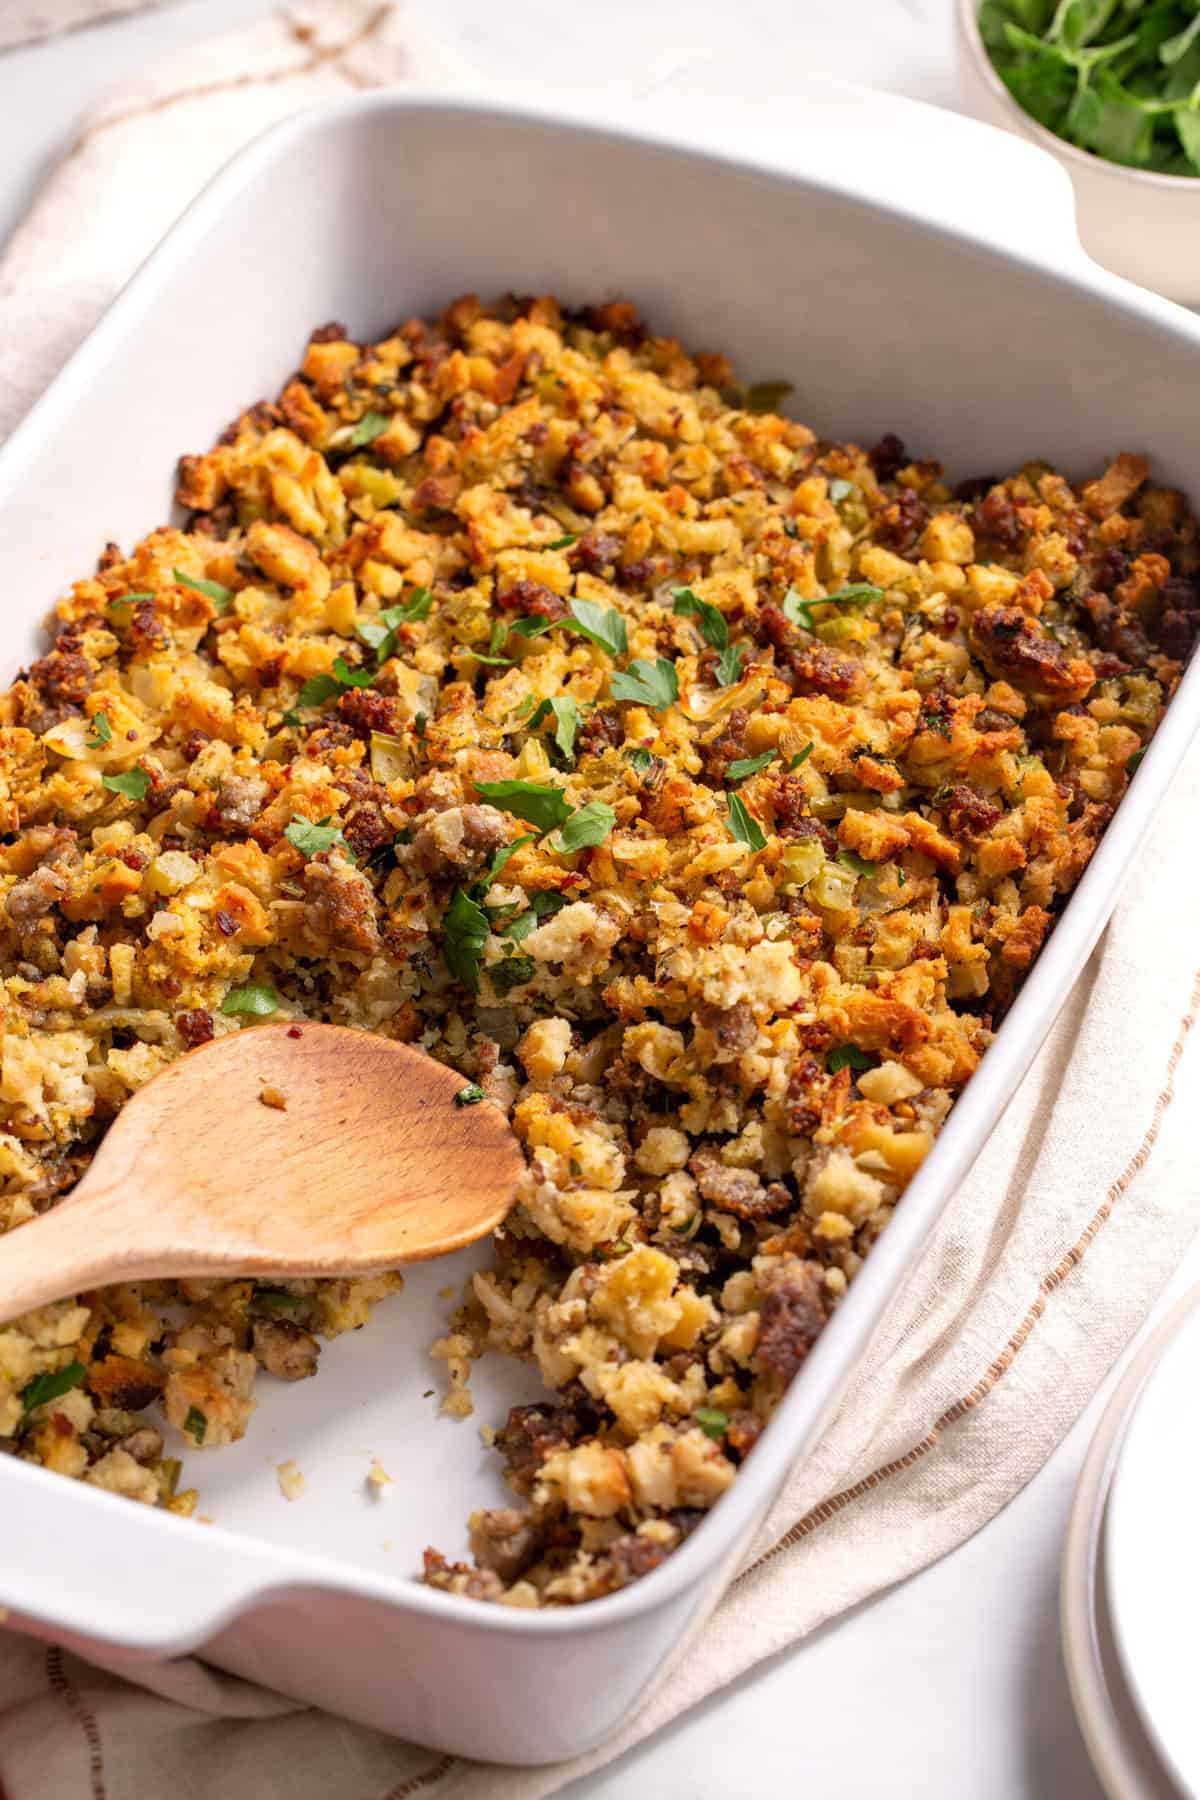 Sausage stuffing served in a white rectangle casserole dish with a wooden spoon.